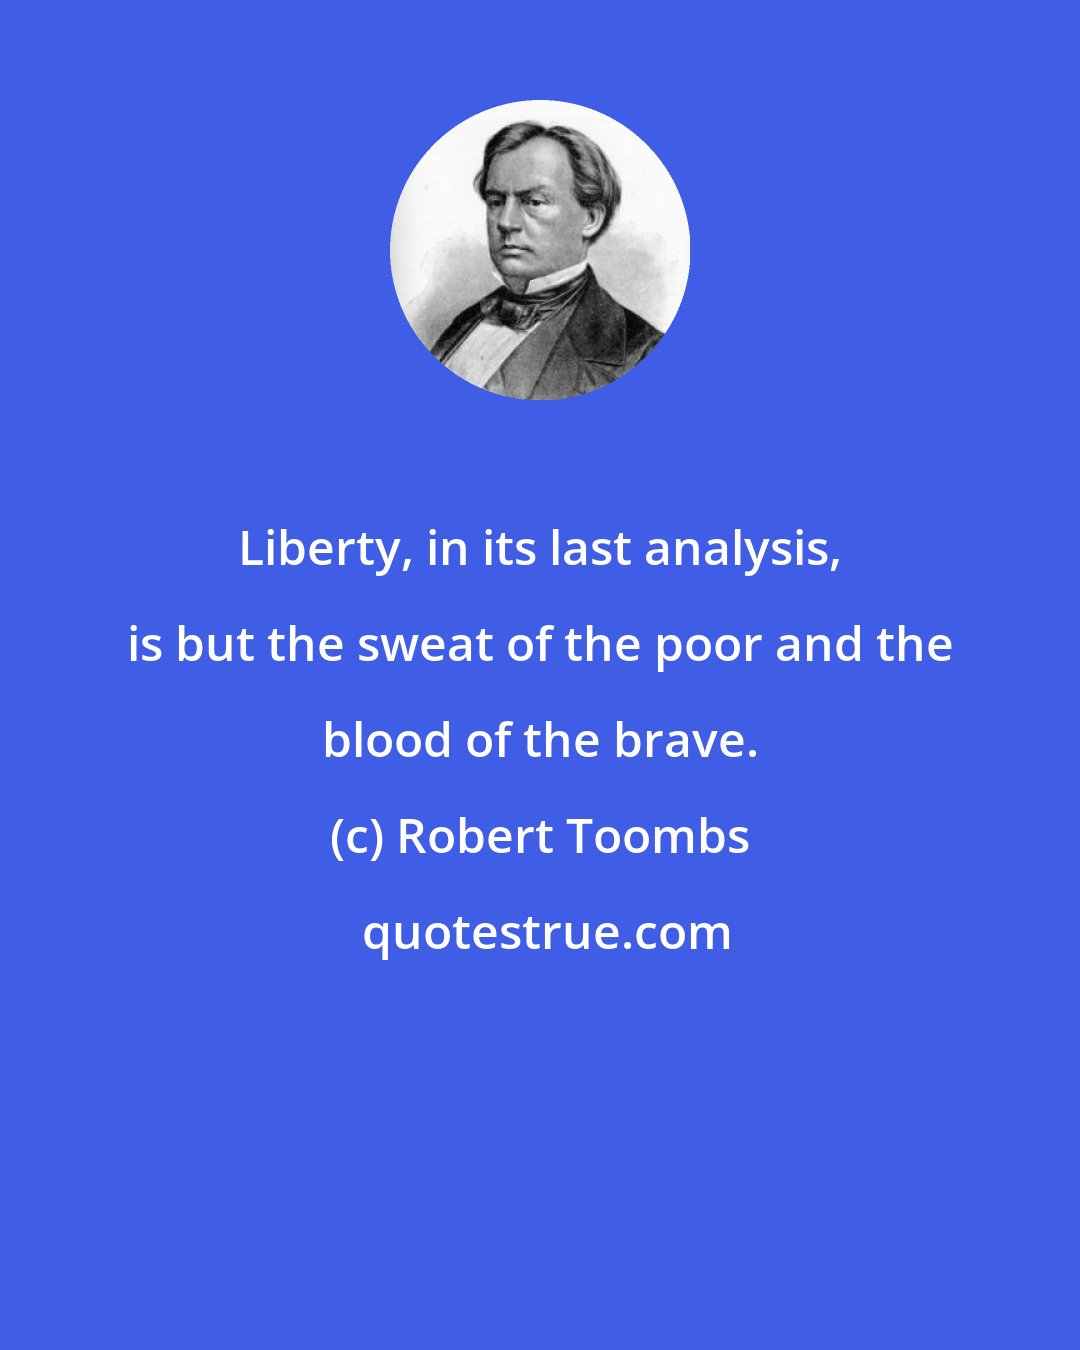 Robert Toombs: Liberty, in its last analysis, is but the sweat of the poor and the blood of the brave.